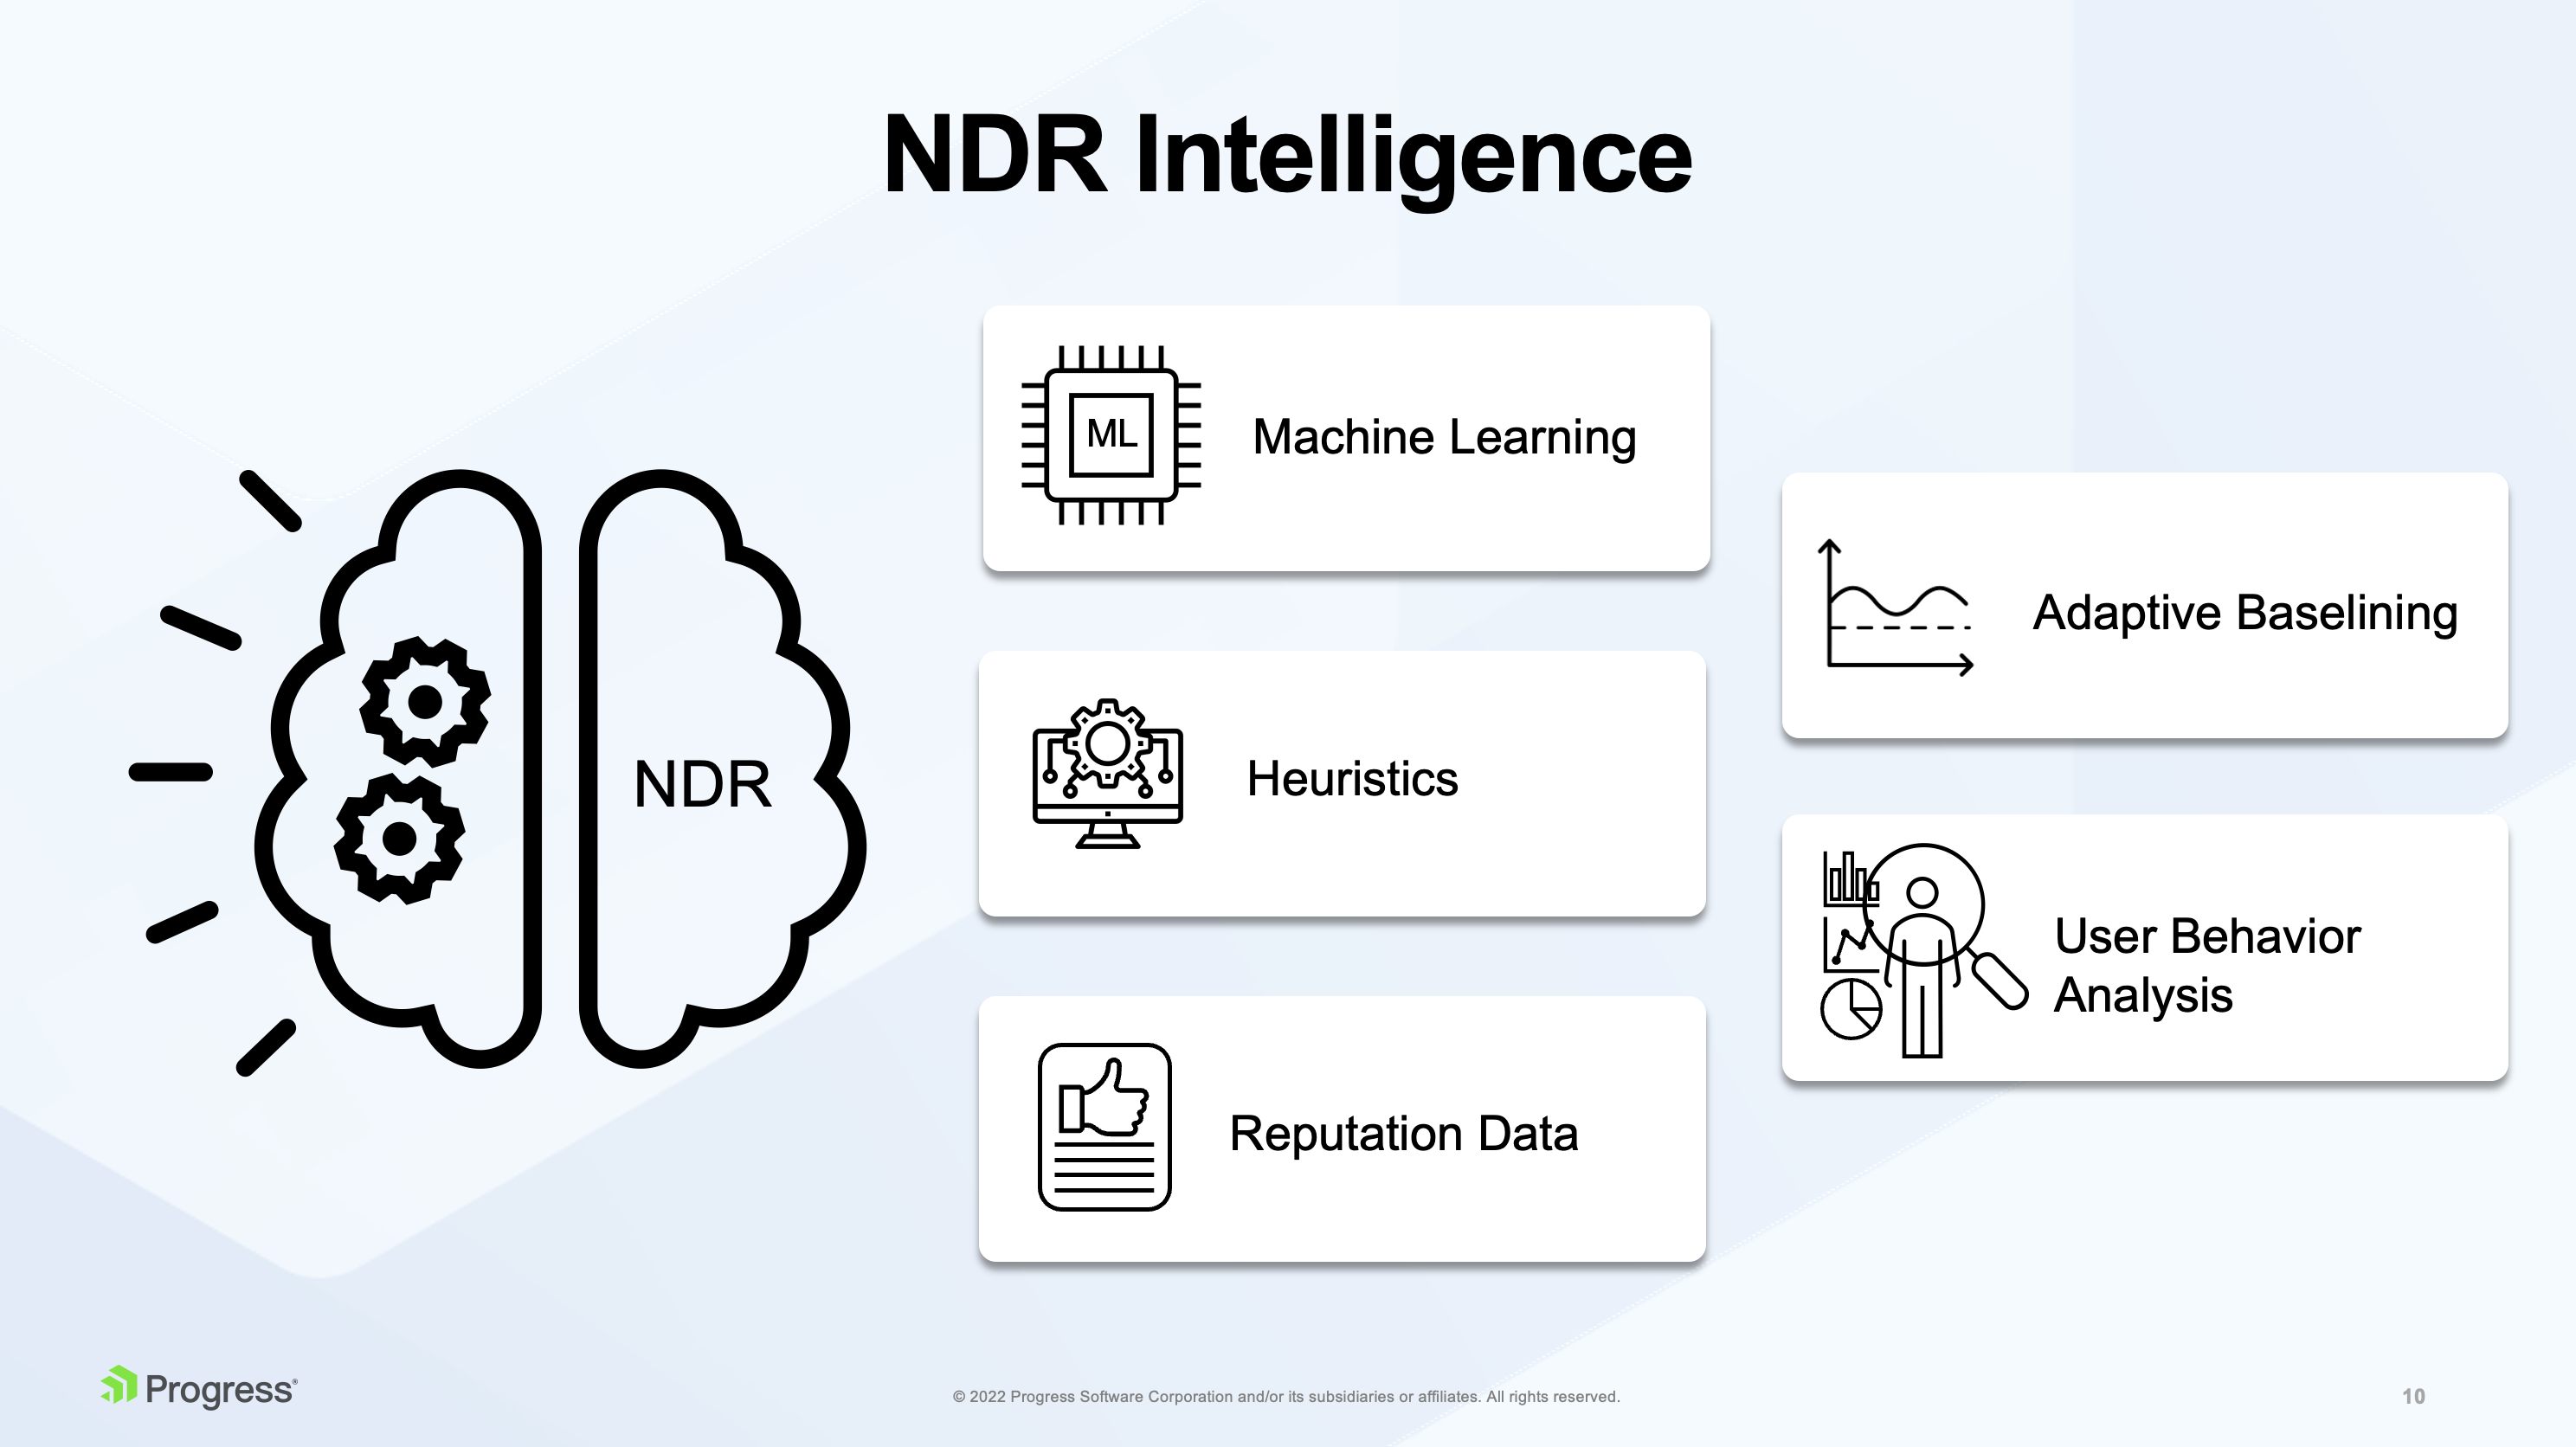 Diagram presenting the intelligence of Network Detection and Response (NDR) by Flowmon